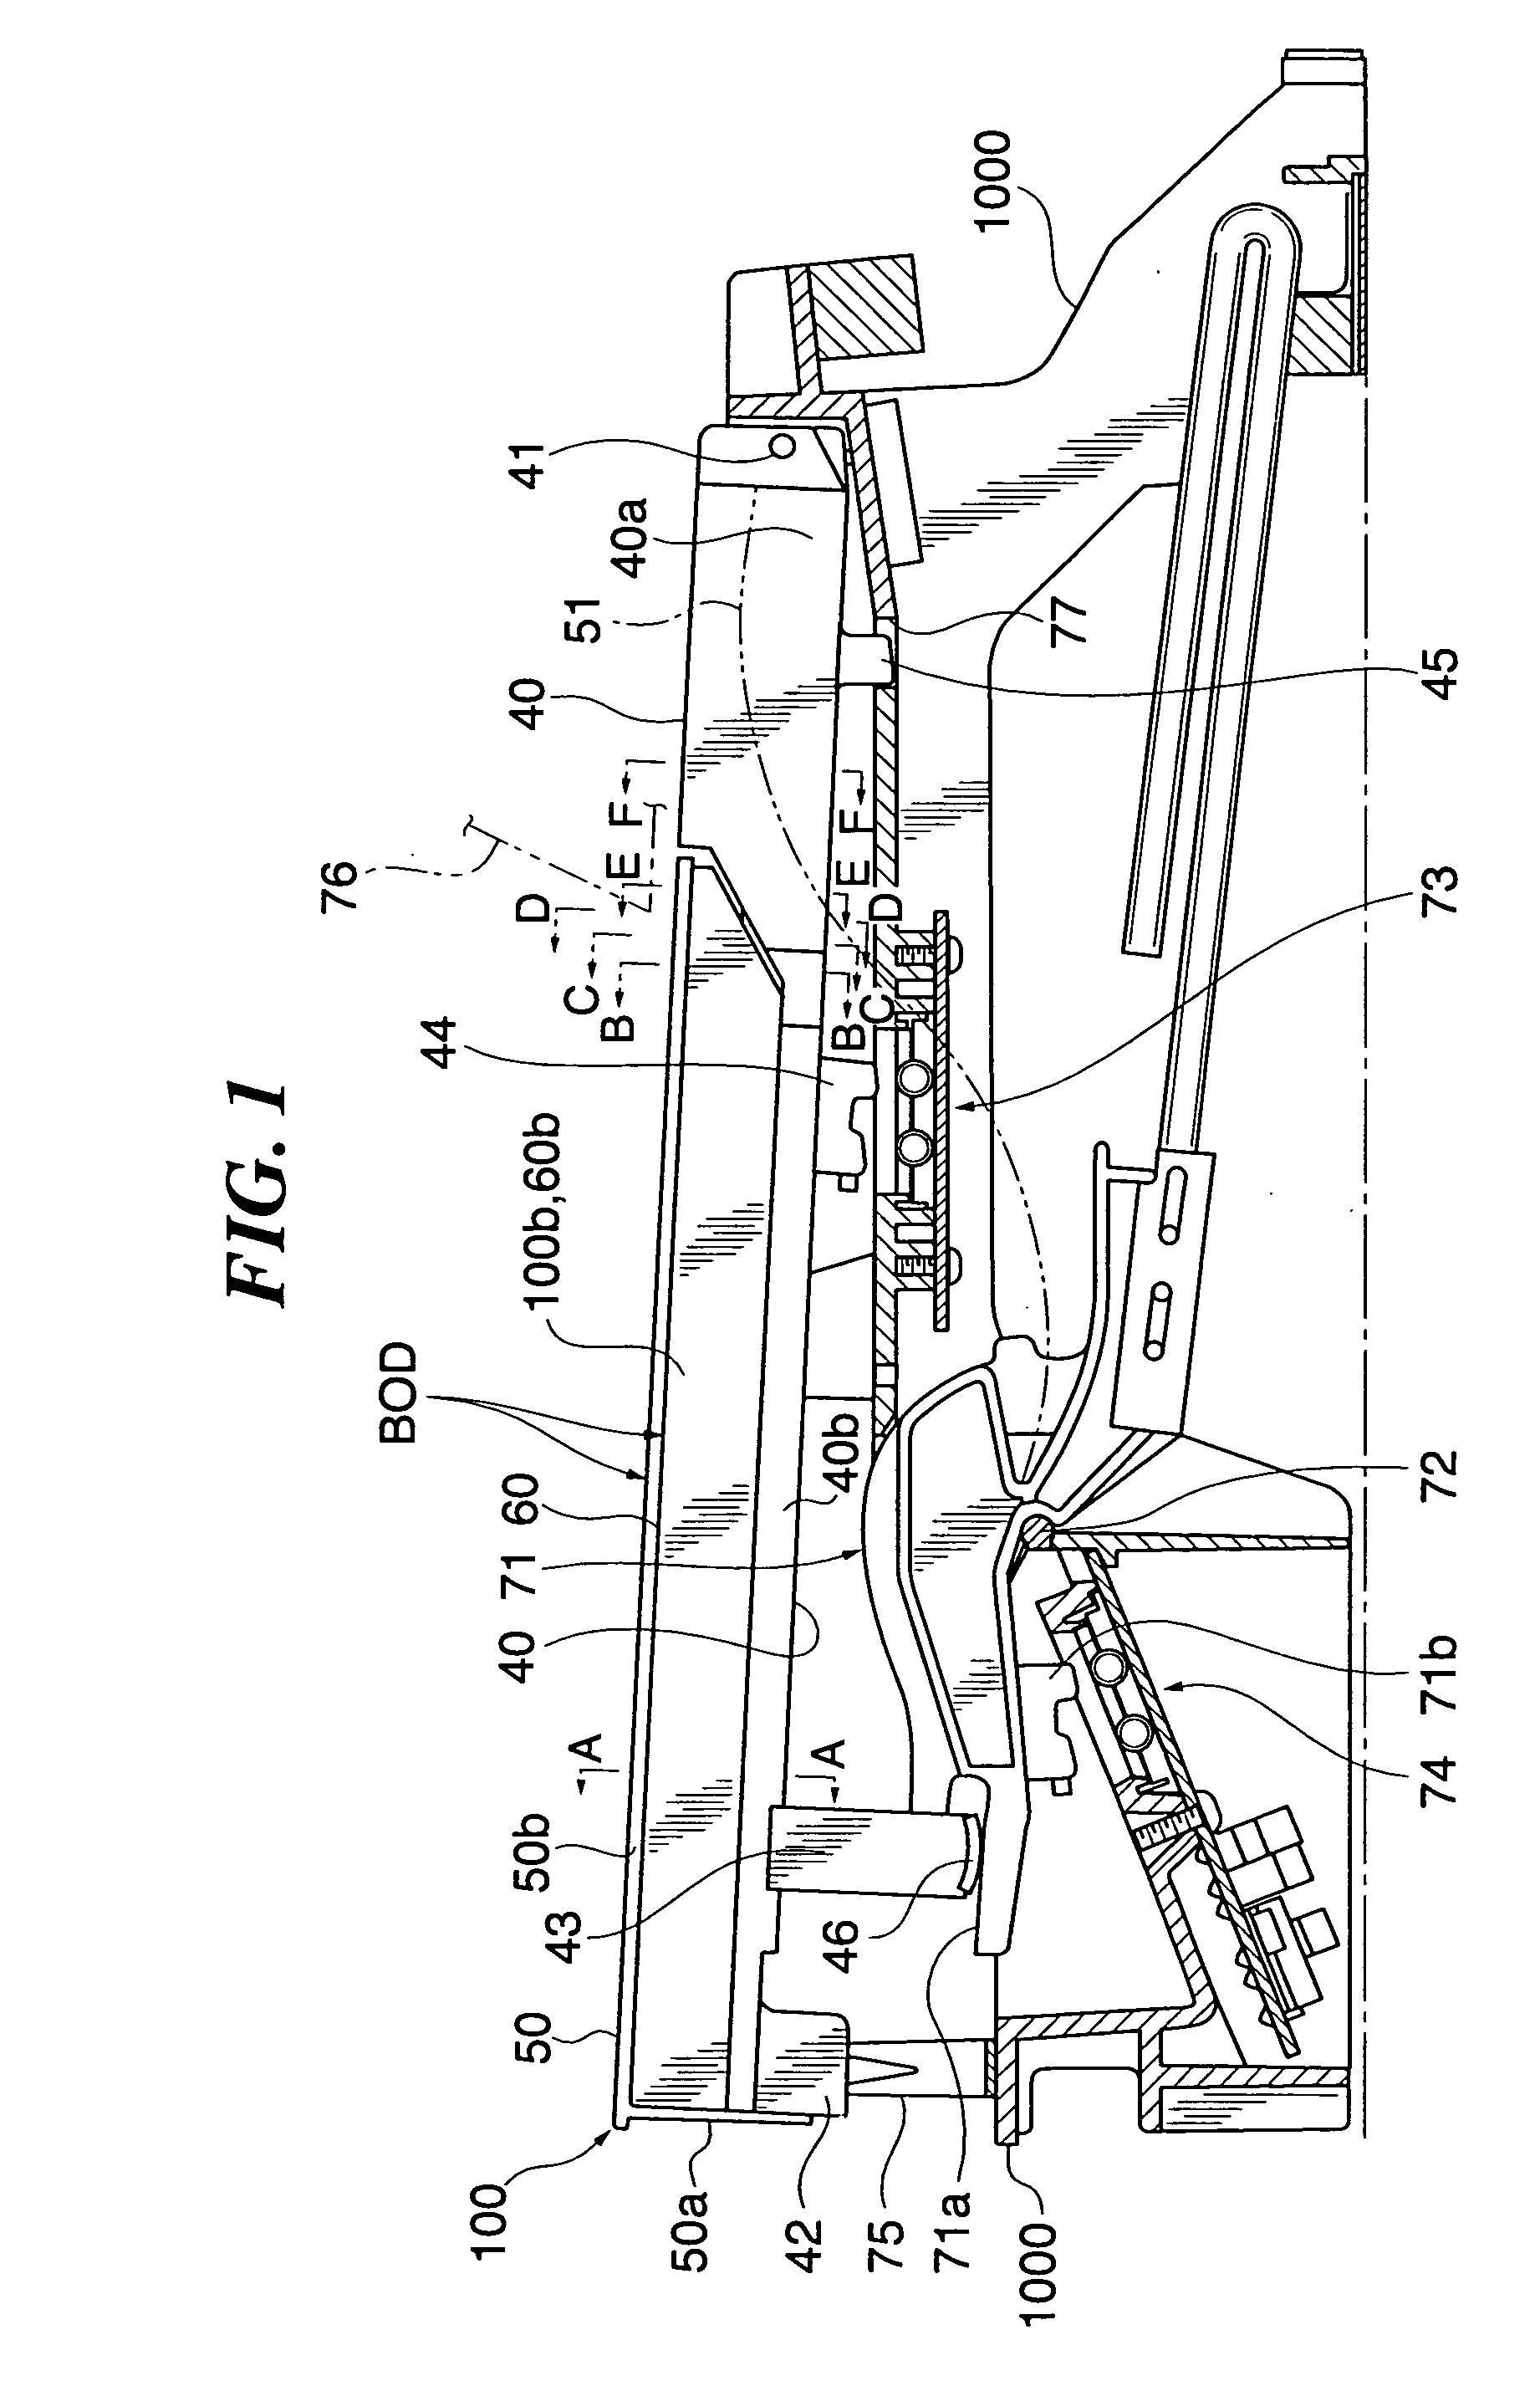 Key structure and keyboard apparatus